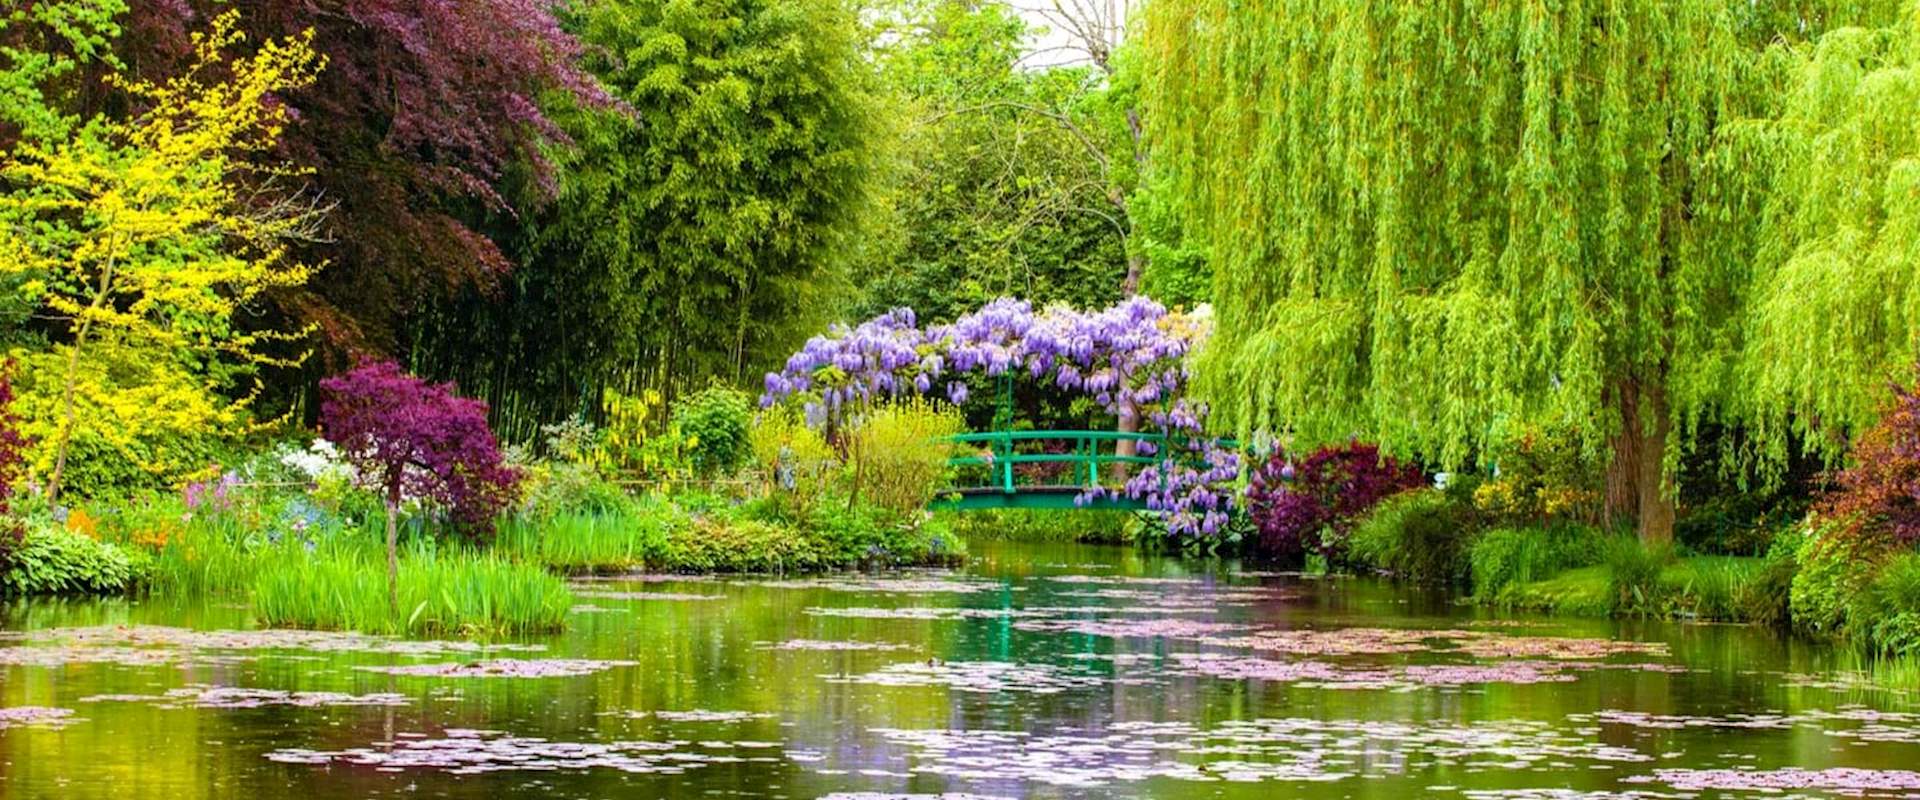 giverny versailles tour